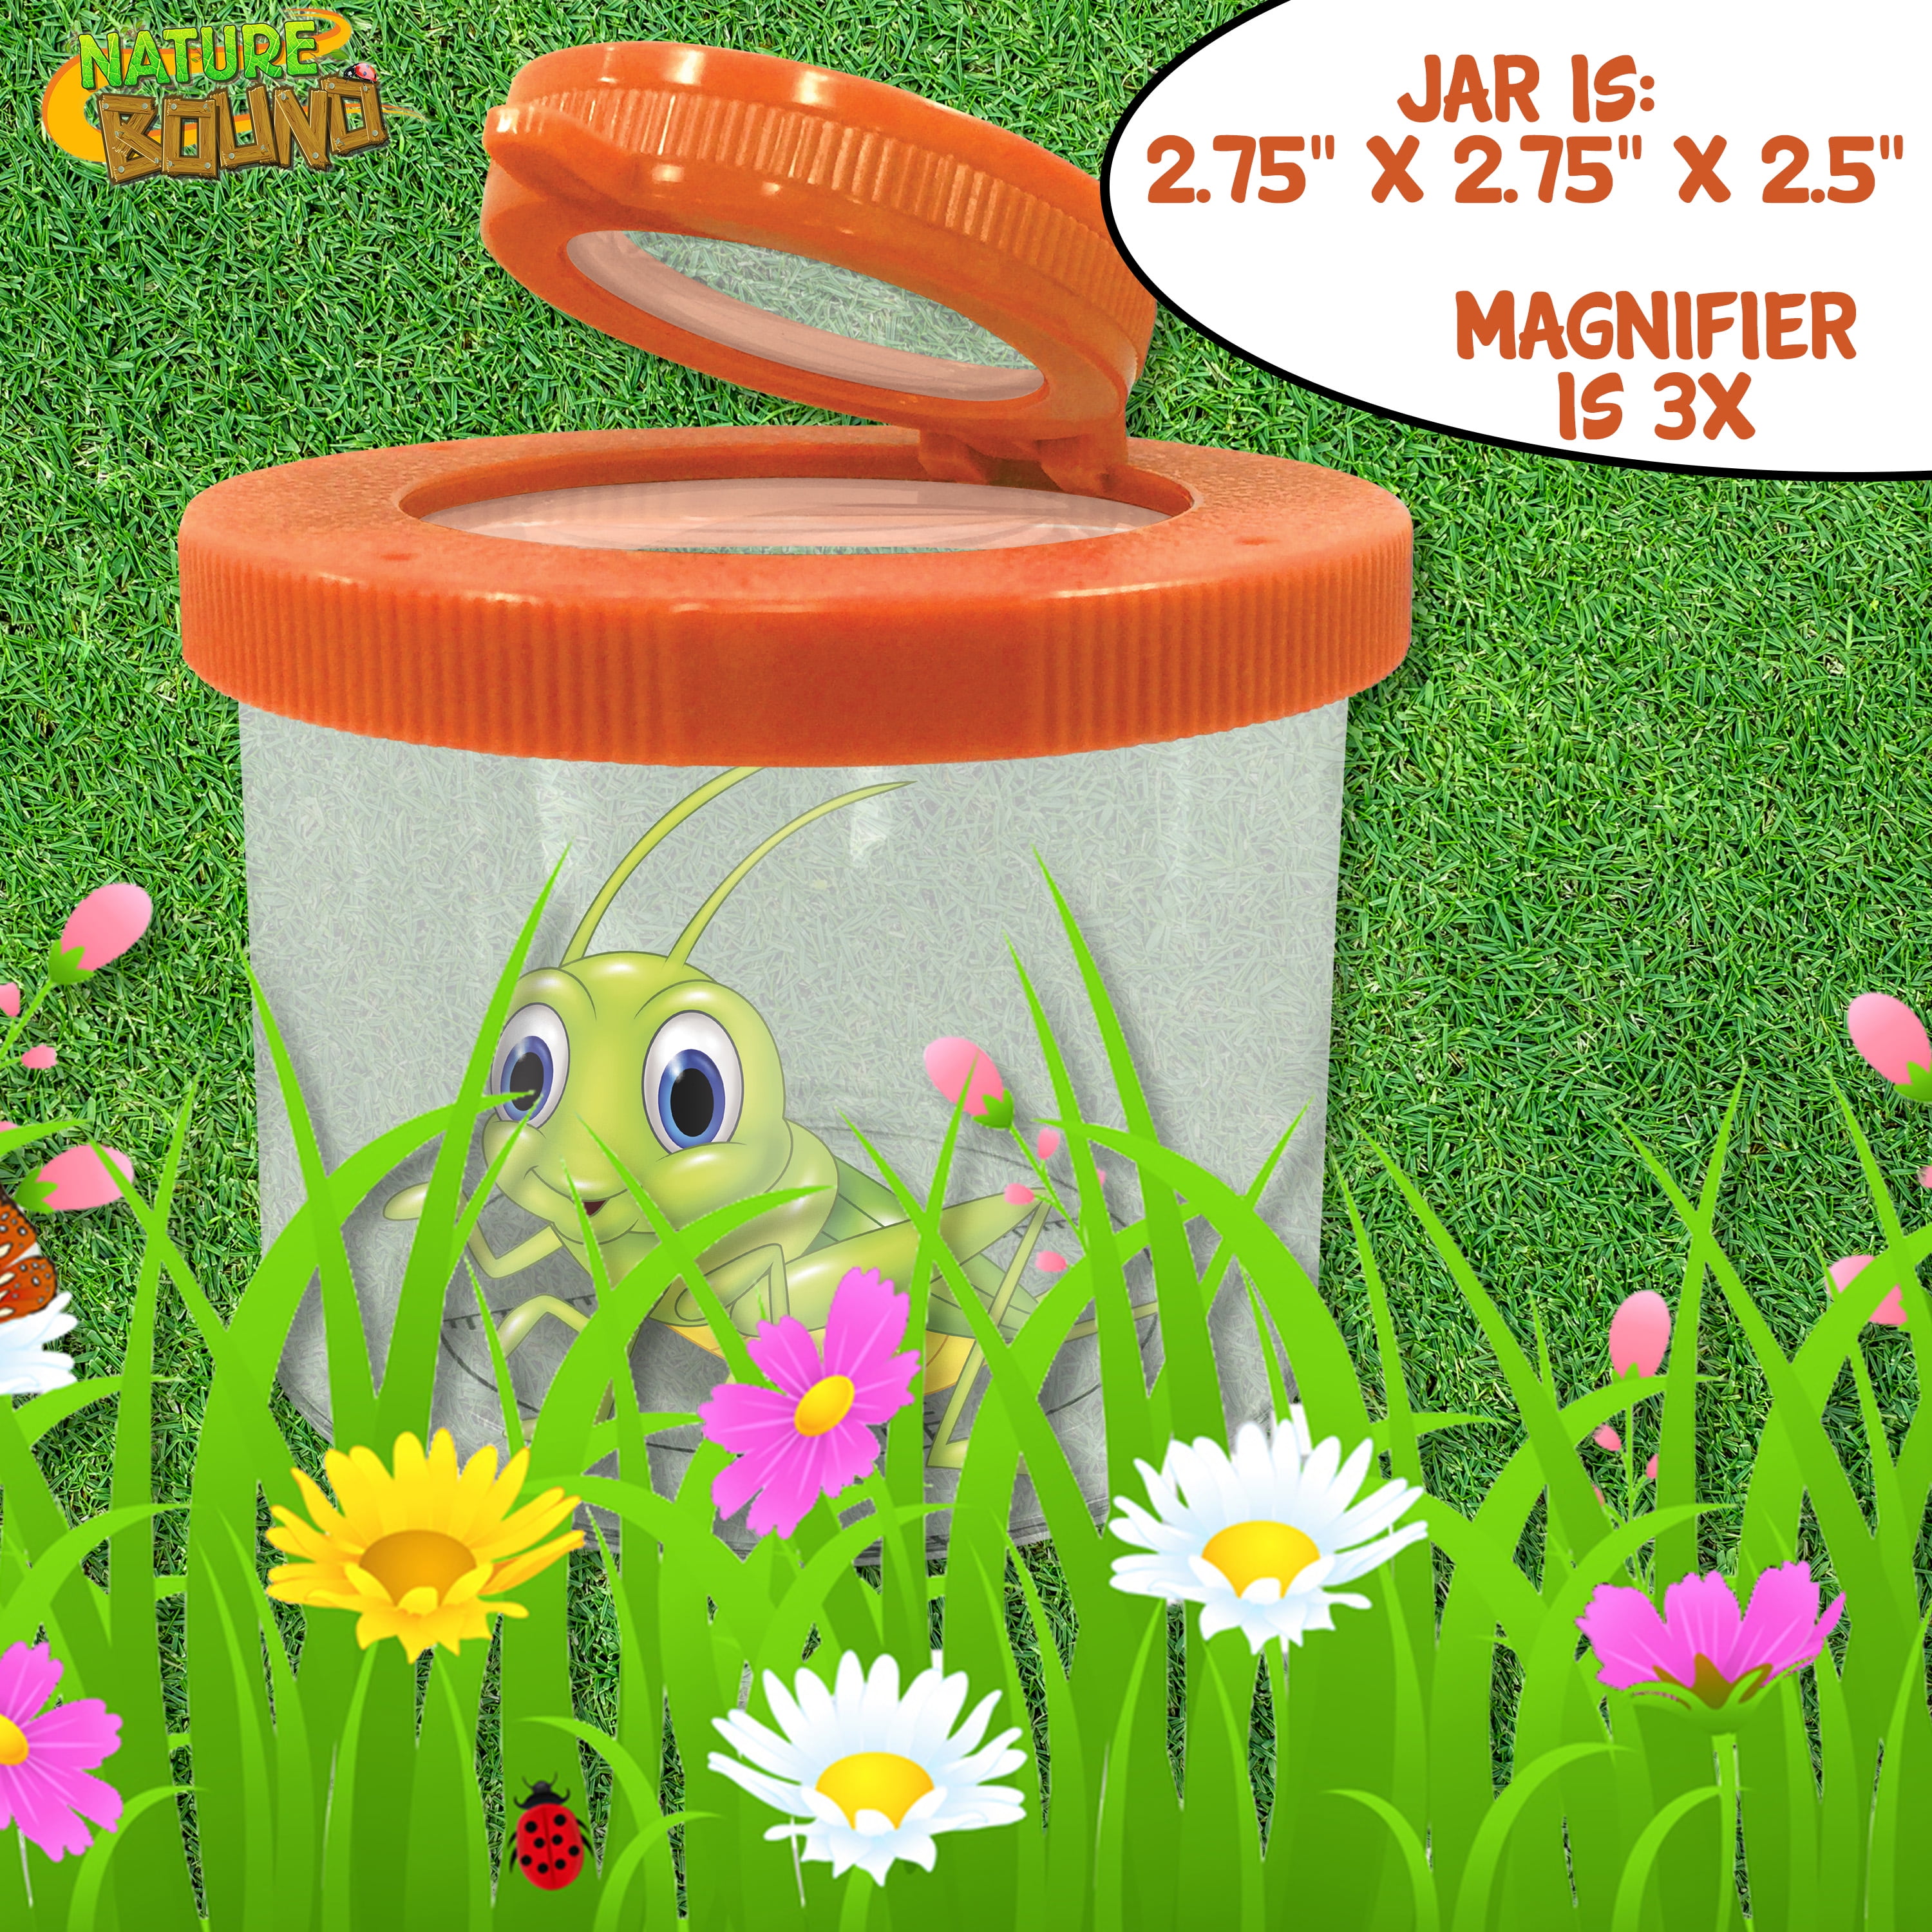 NEW 8x Insect Bug Viewer Magnifier With Scale 9led Children